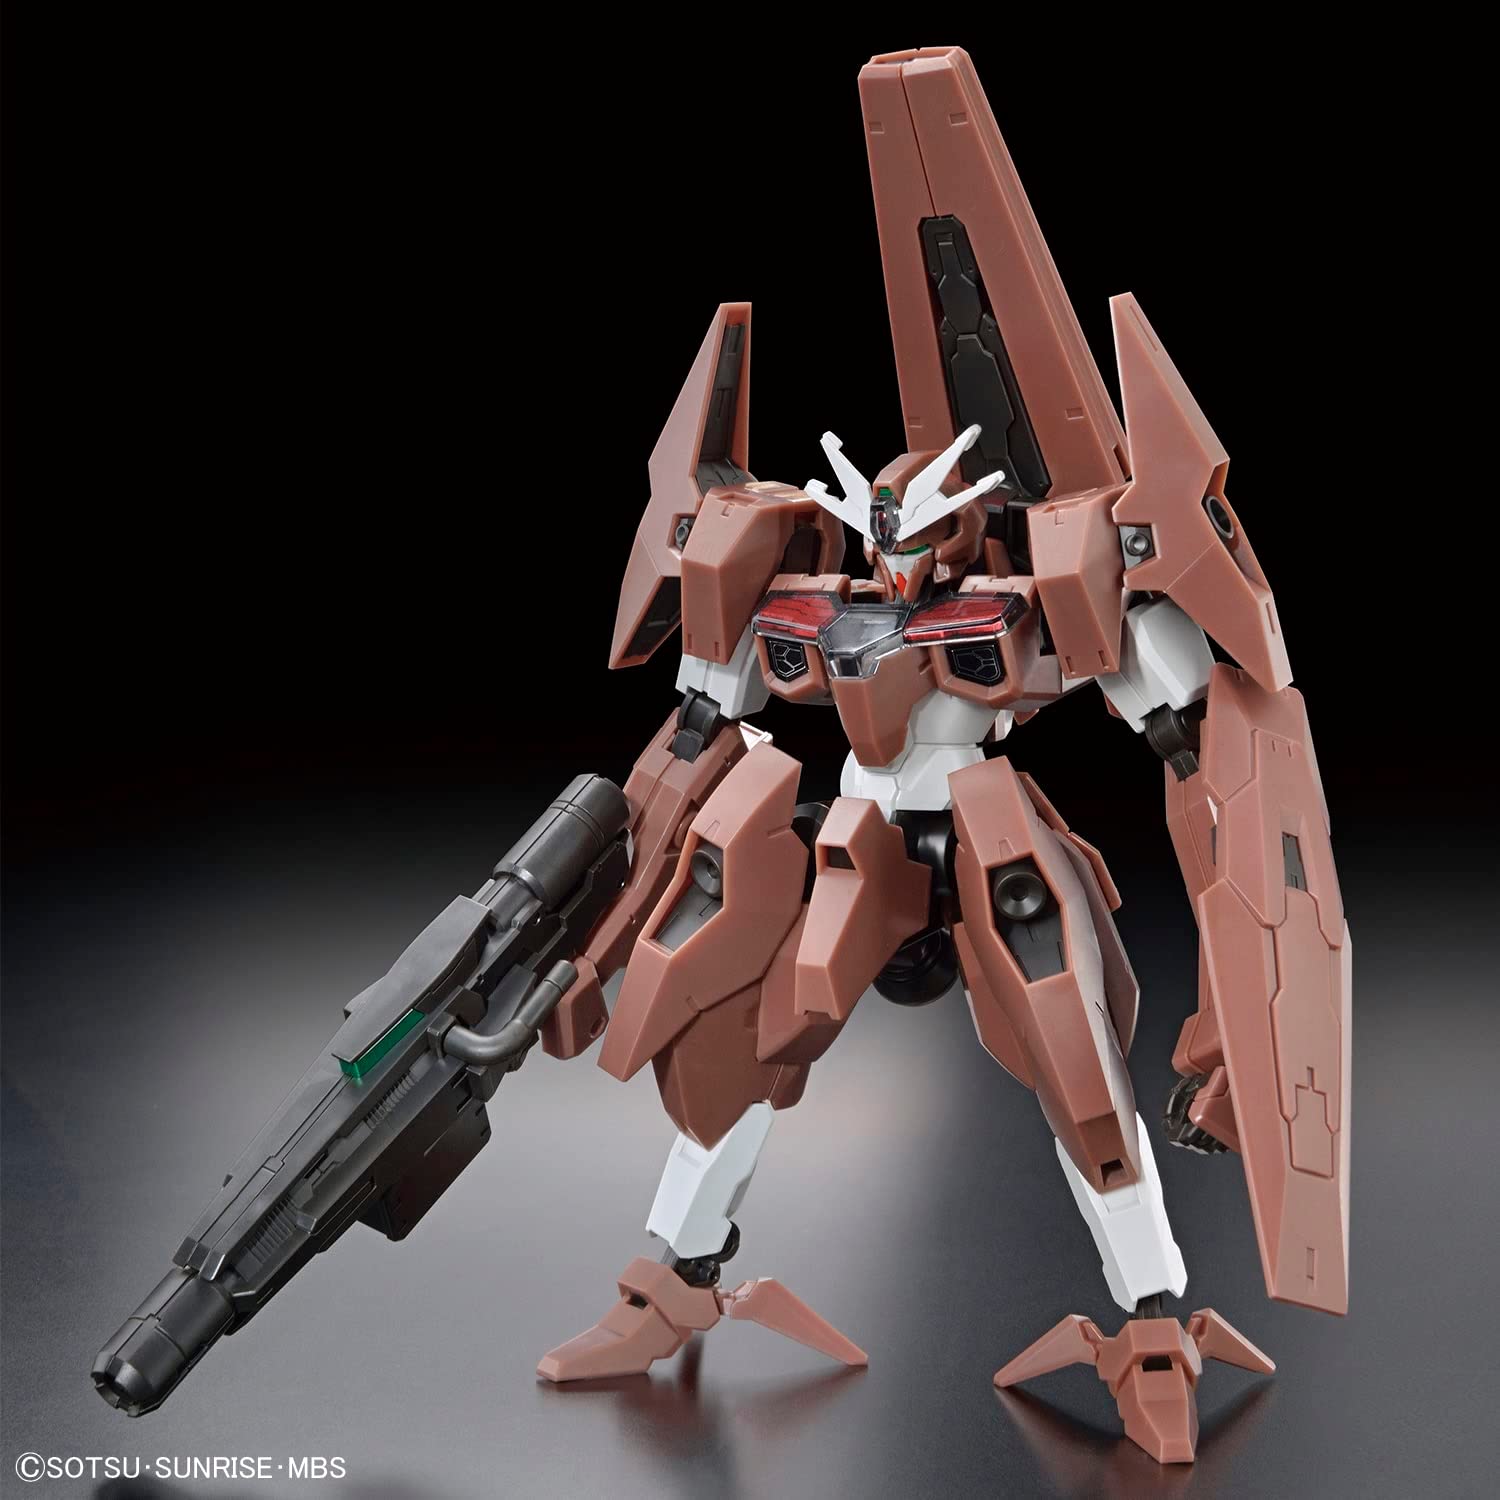 HG Gundam Lfrith (Mobile Suit Gundam: The Witch from Mercury)